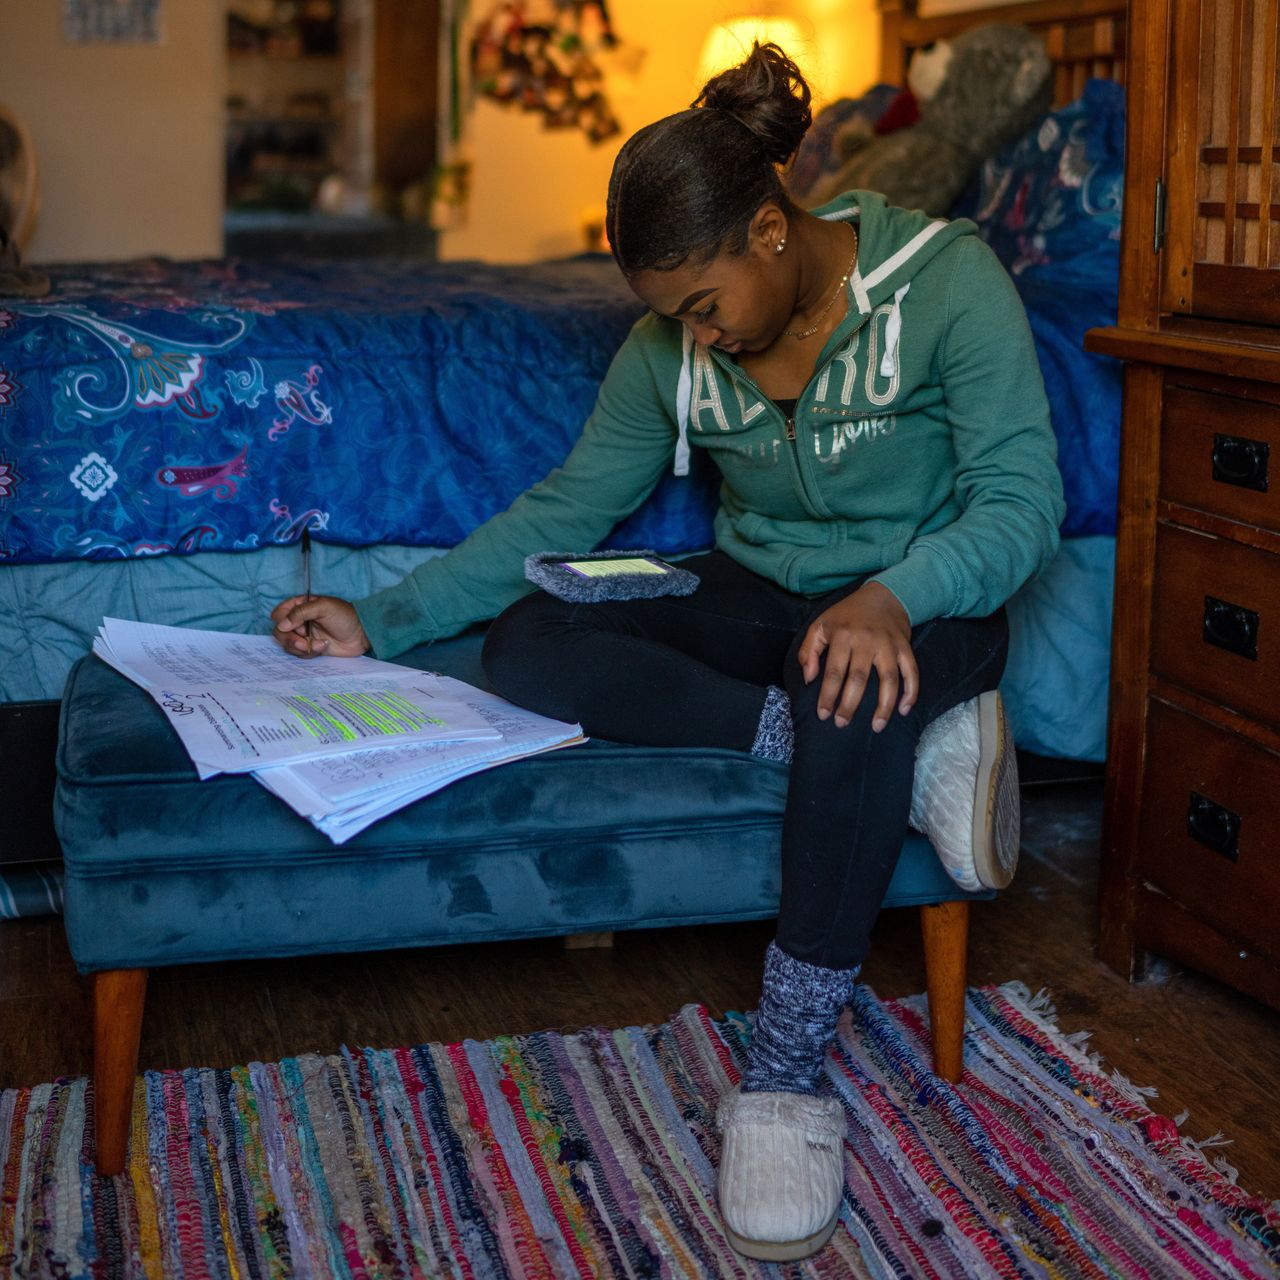 Satoriya Lambert does homework in her room after the coronavirus shuttered schools for the rest of the year in New Orleans. Satoriya was 3 when she and her family fled after Hurricane Katrina flooded the city.